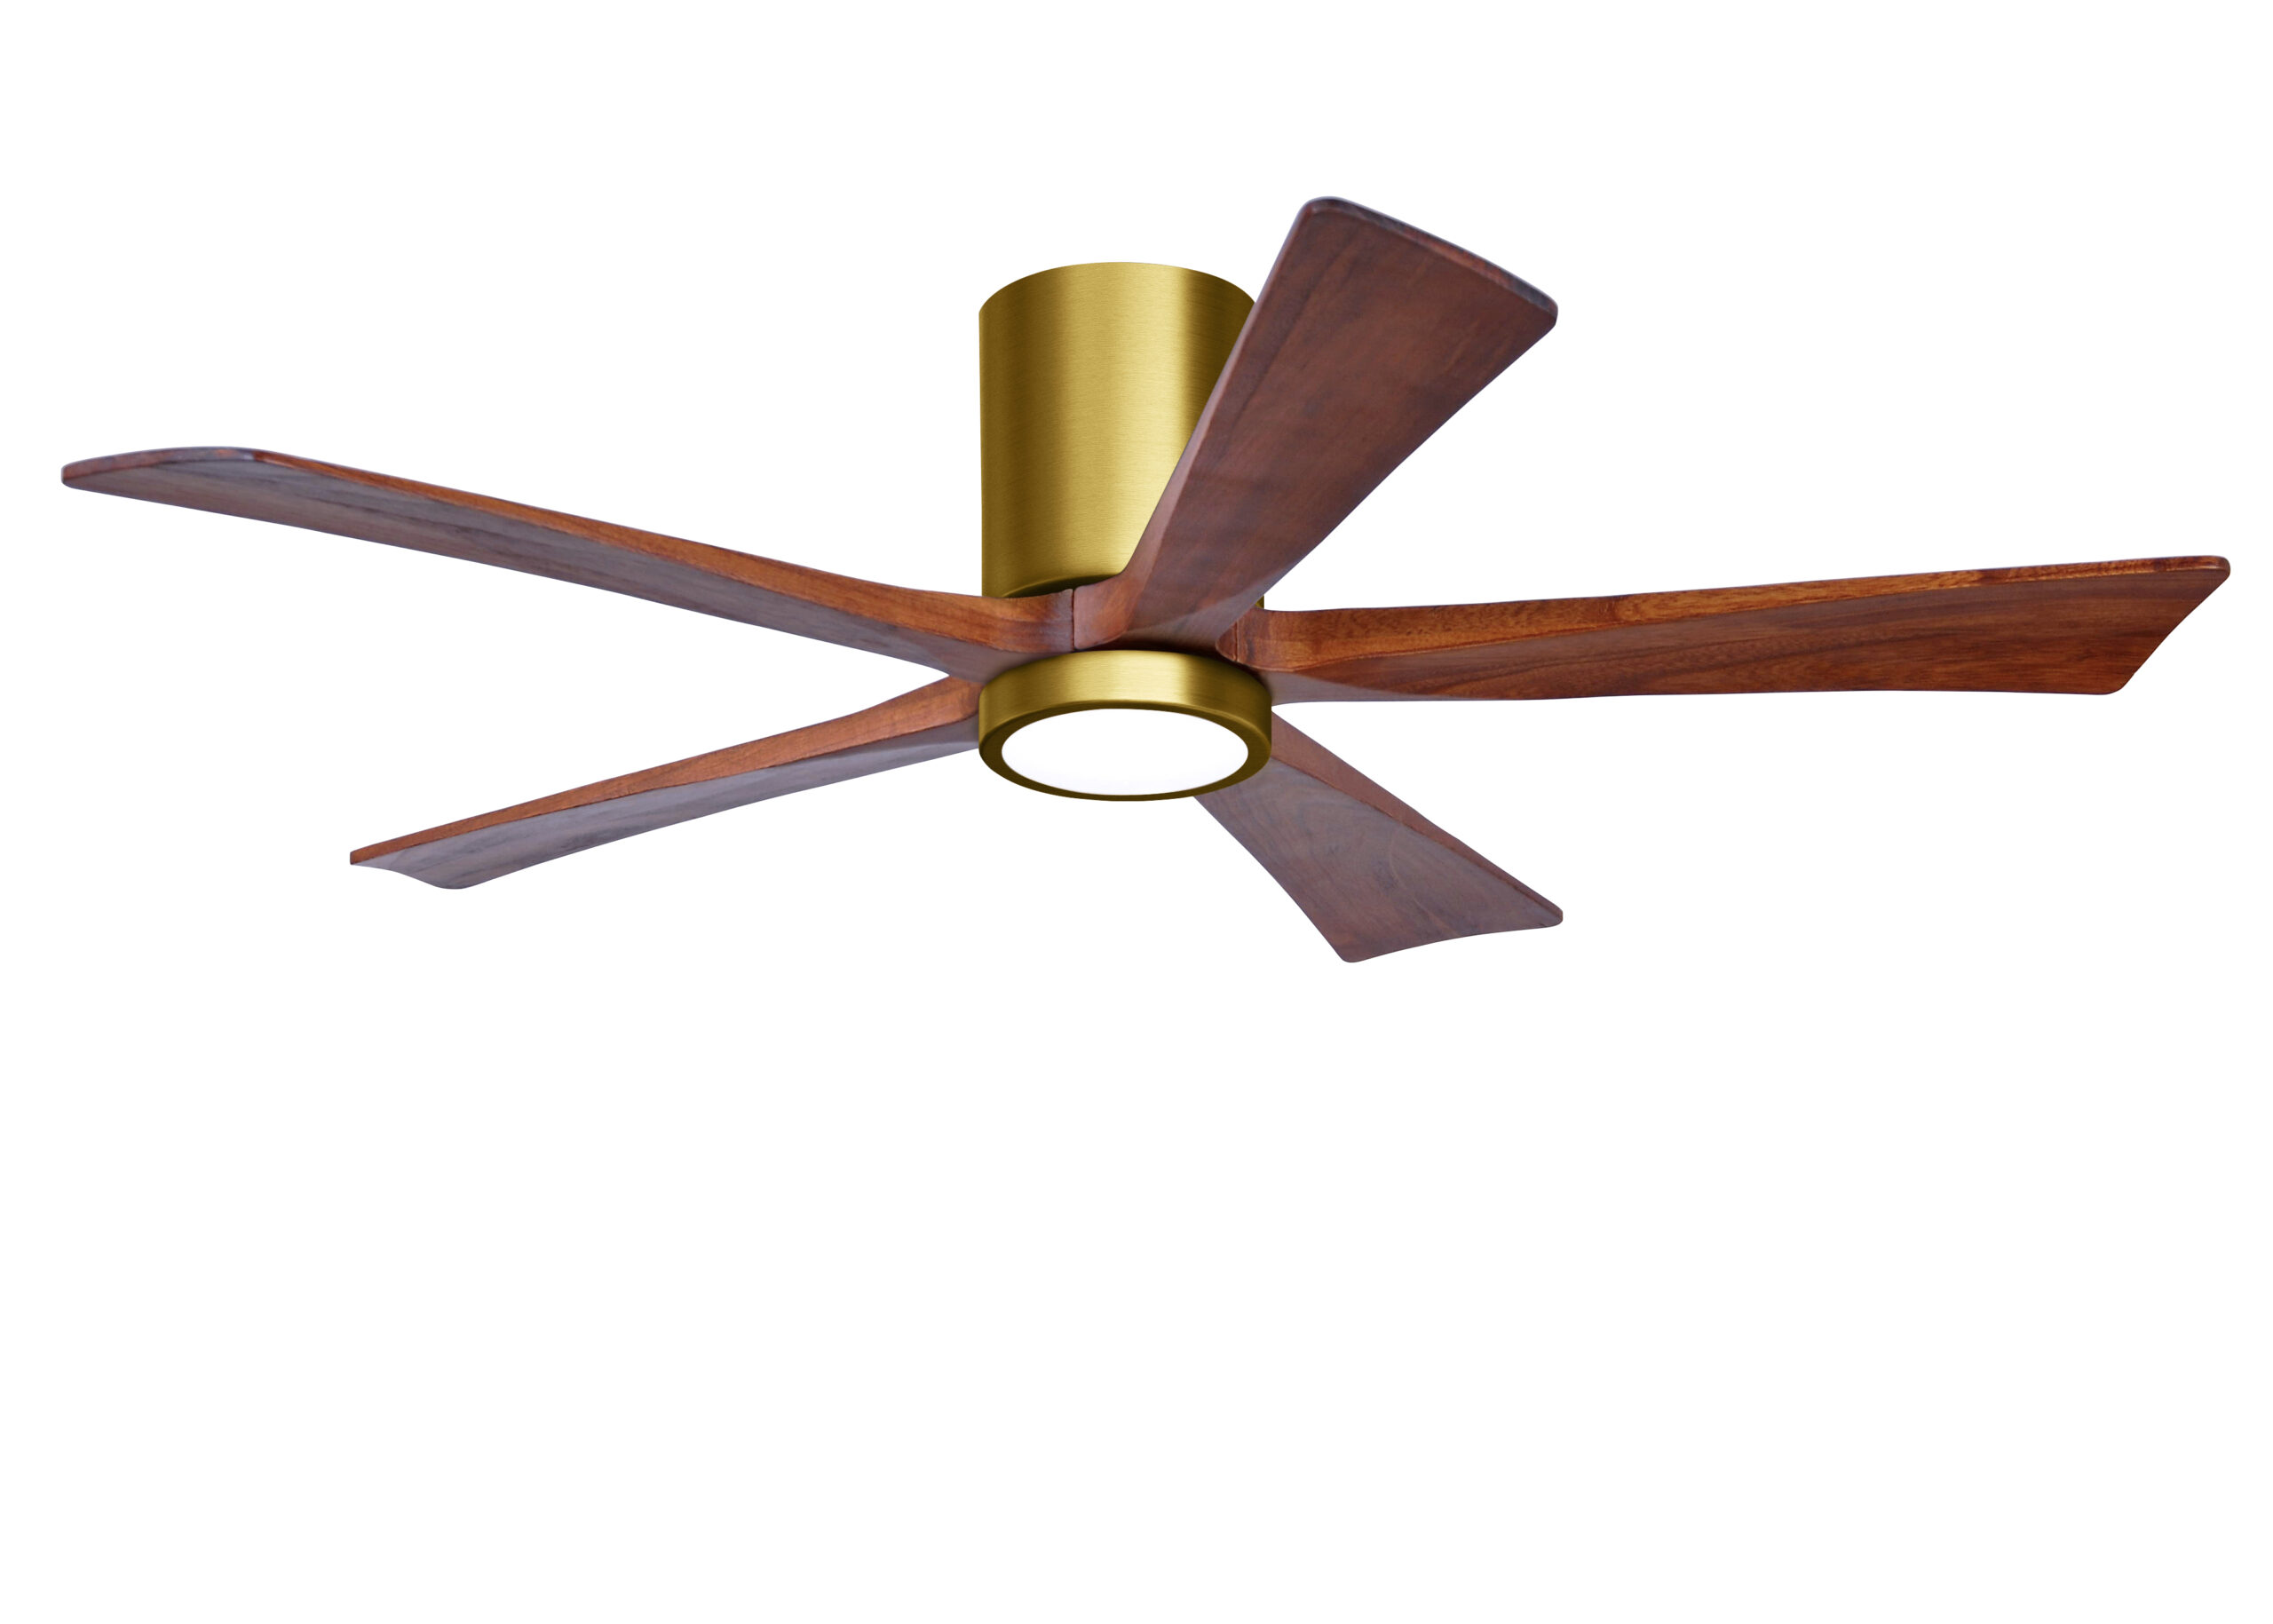 Irene-5HLK Ceiling Fan in Brushed Brass Finish with 52